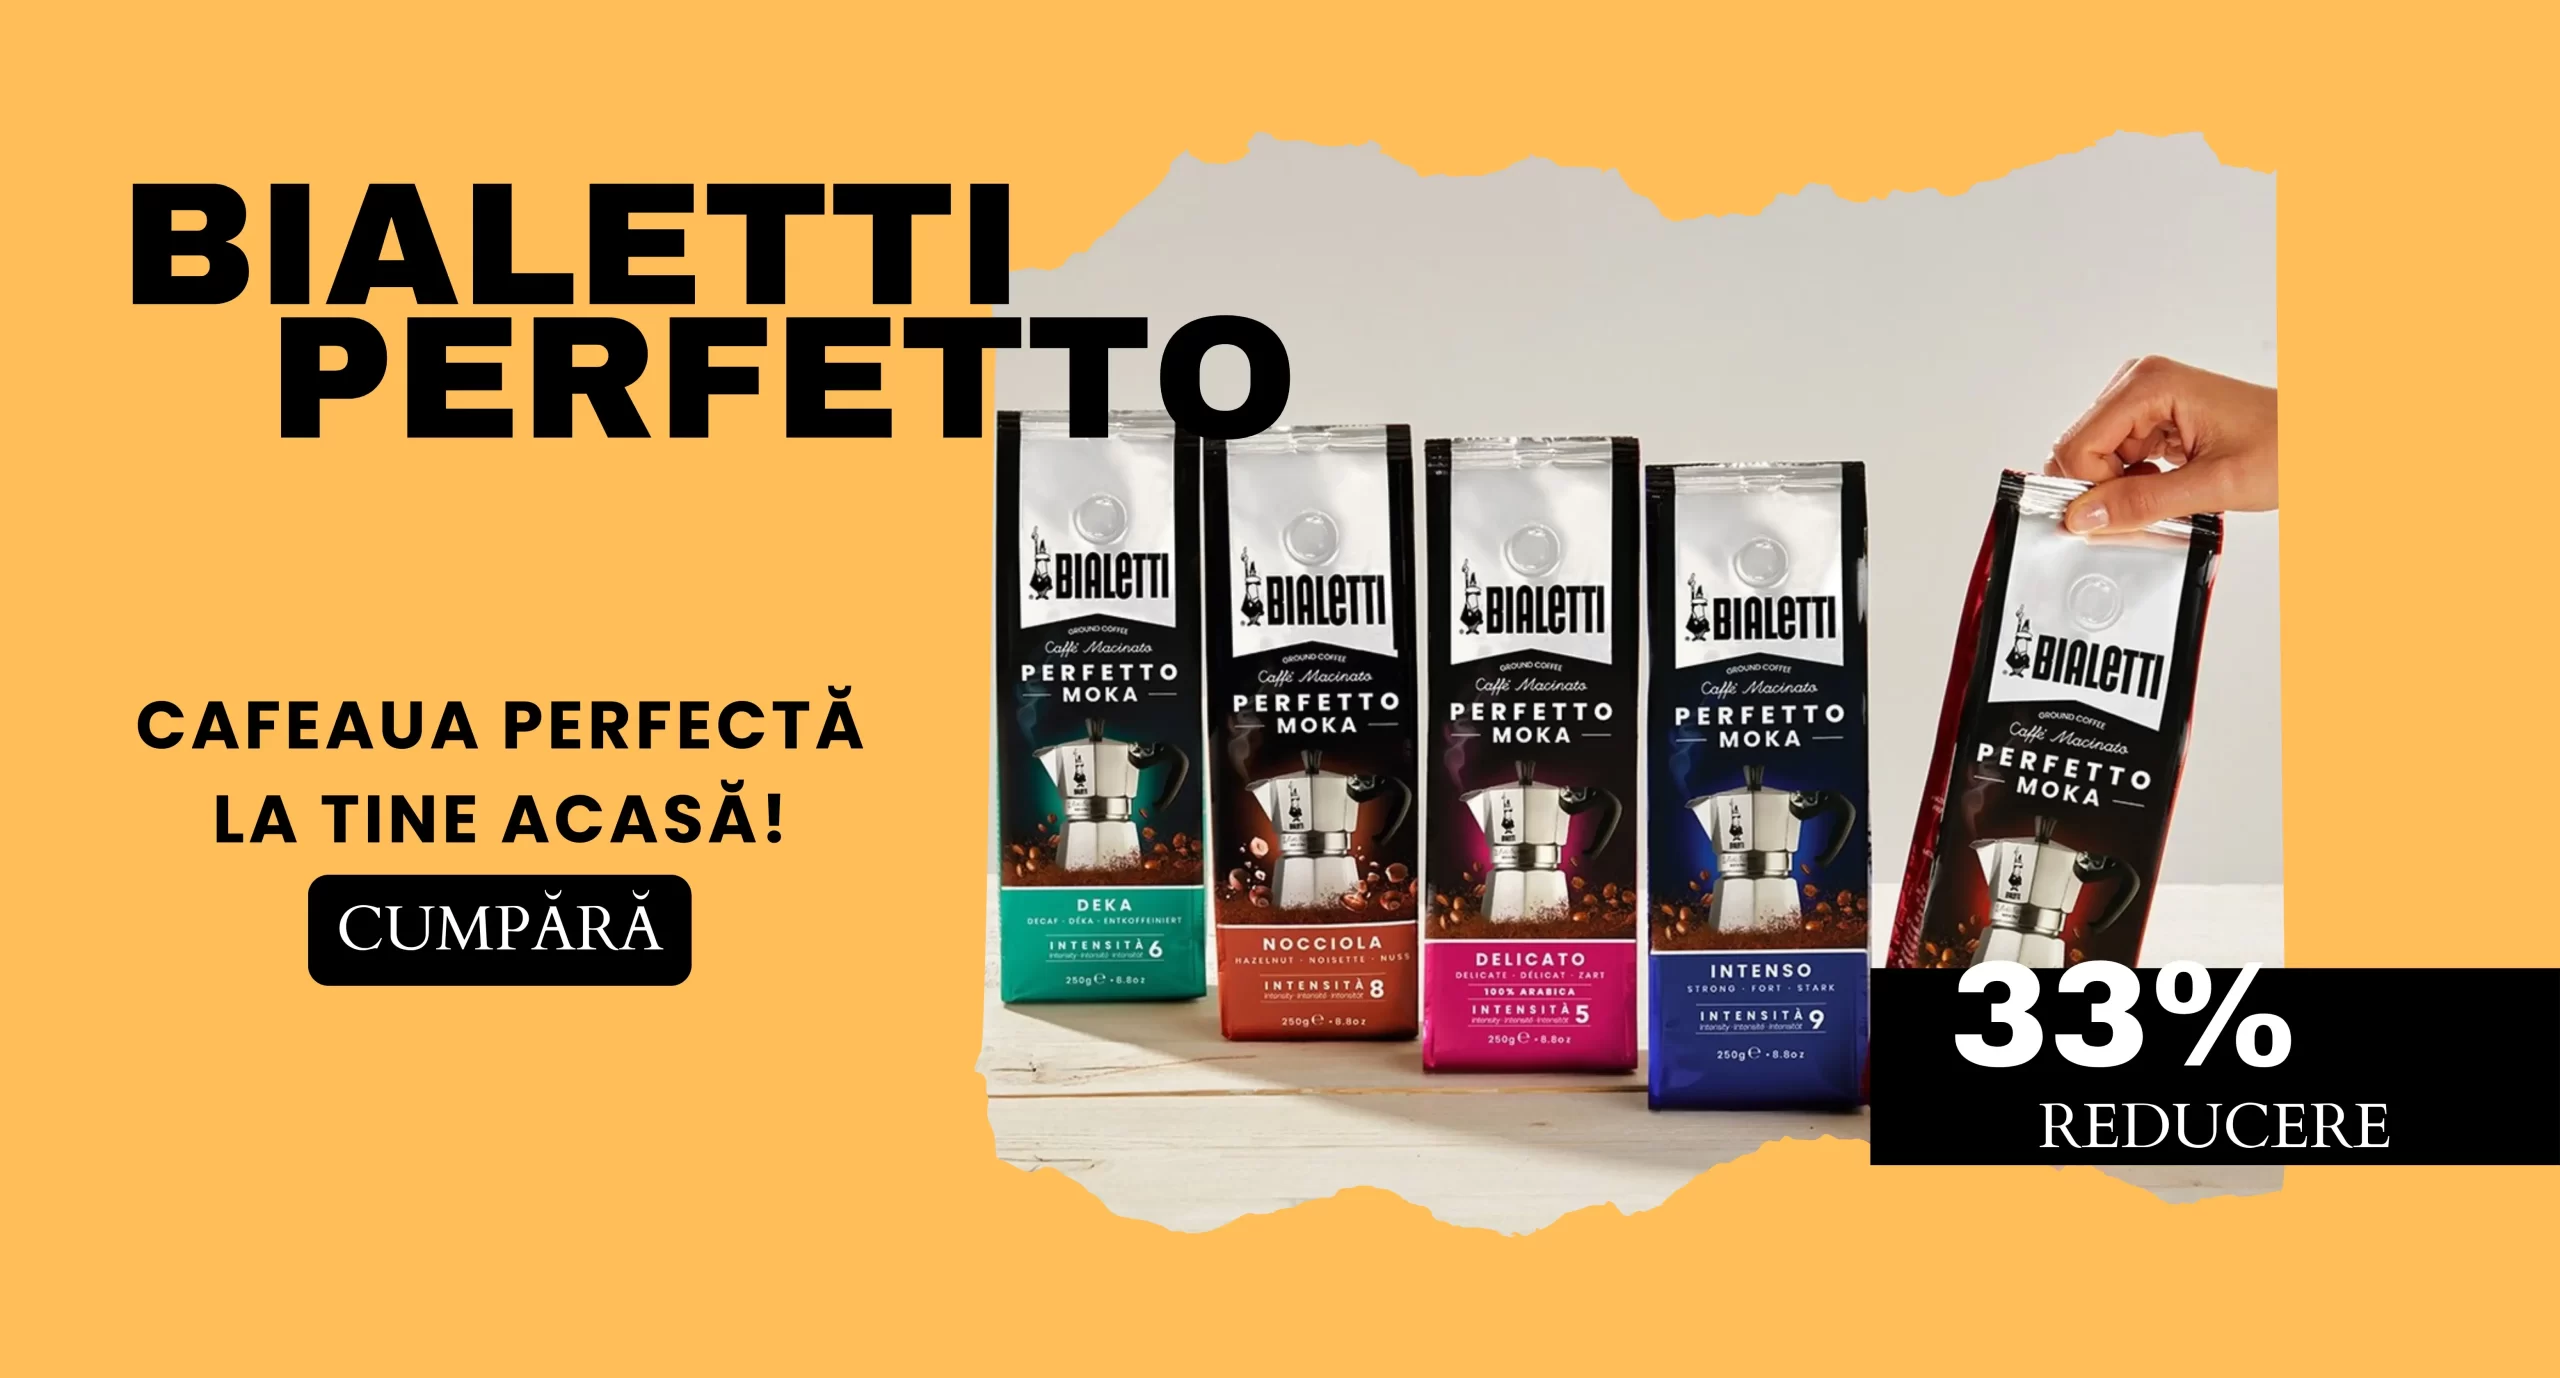 Bialetti aroma caffe ro BANNER 1 scaled AromaKaffe